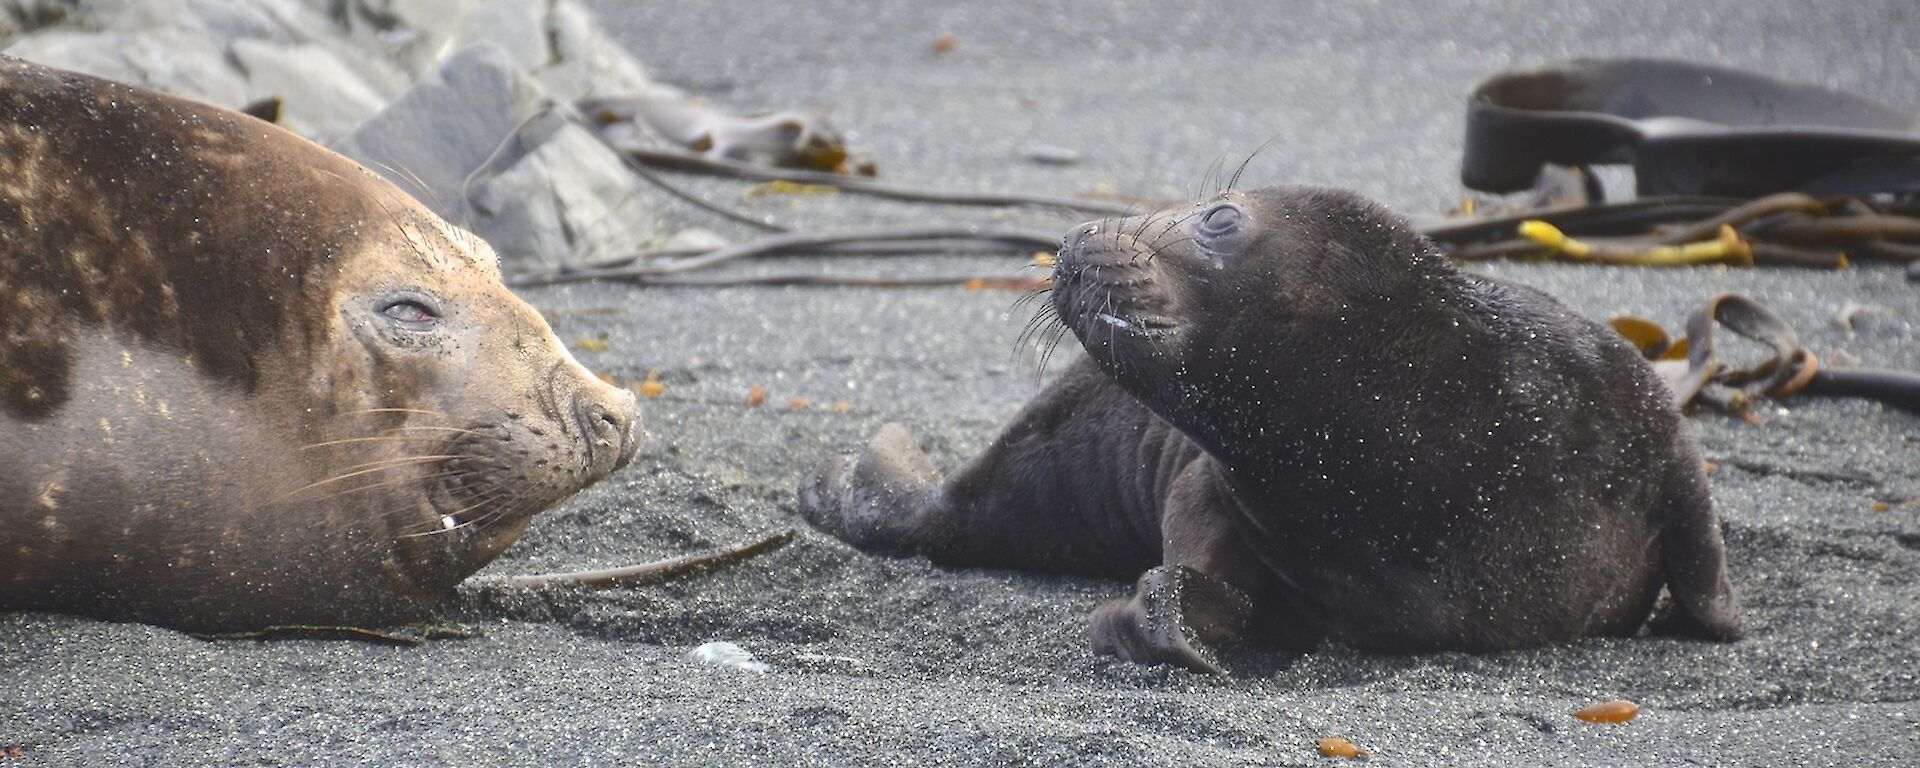 The first elephant seal pup for the season, born on September 7th at Razorback West harem. It is to one side of its mother and is looking towards her